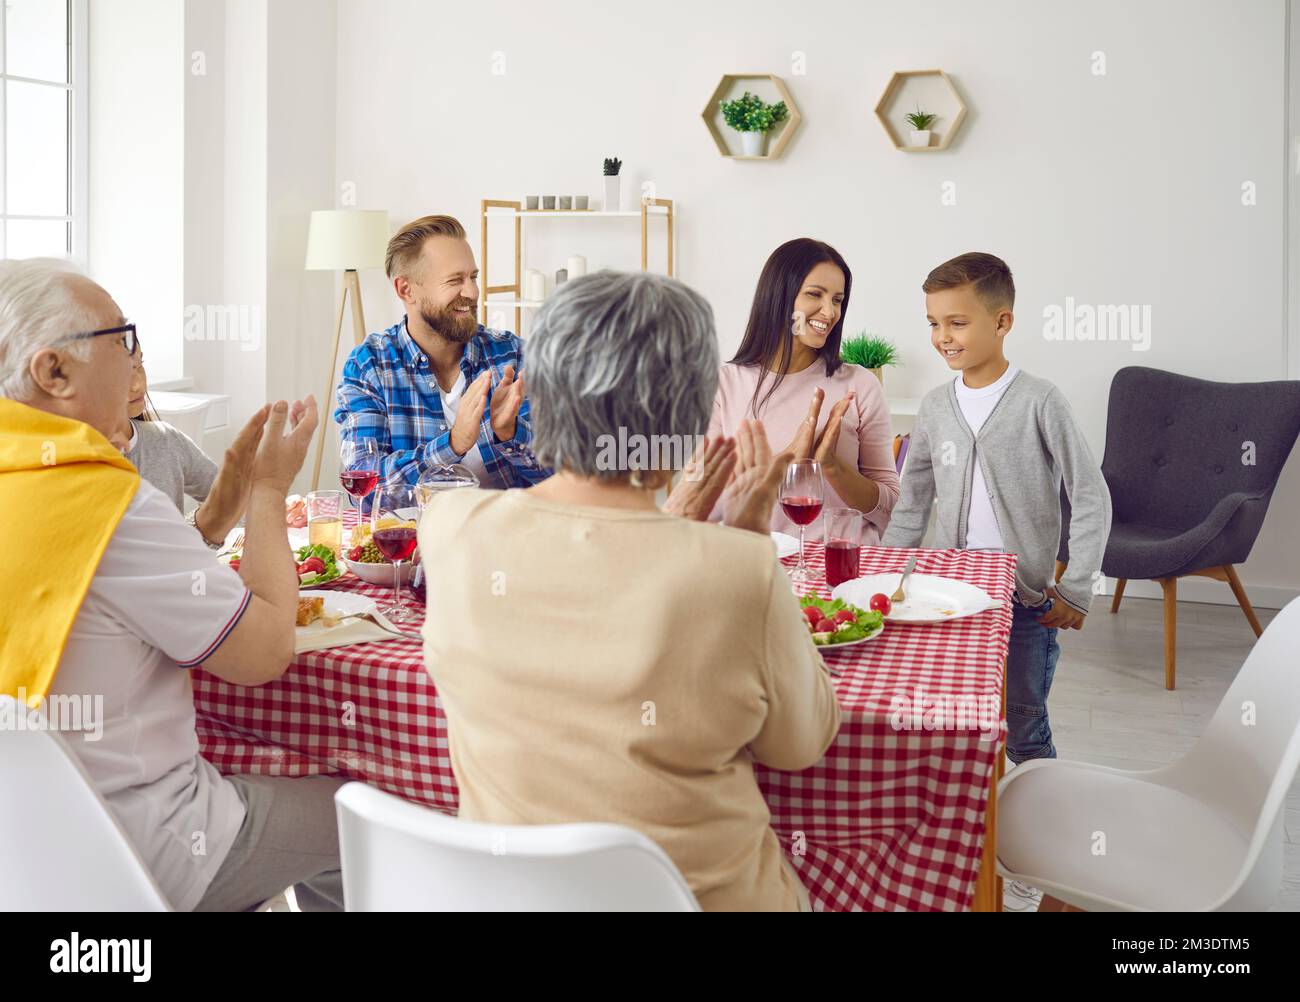 Big family congratulates child boy and clapping hands during family dinner in living room. Stock Photo